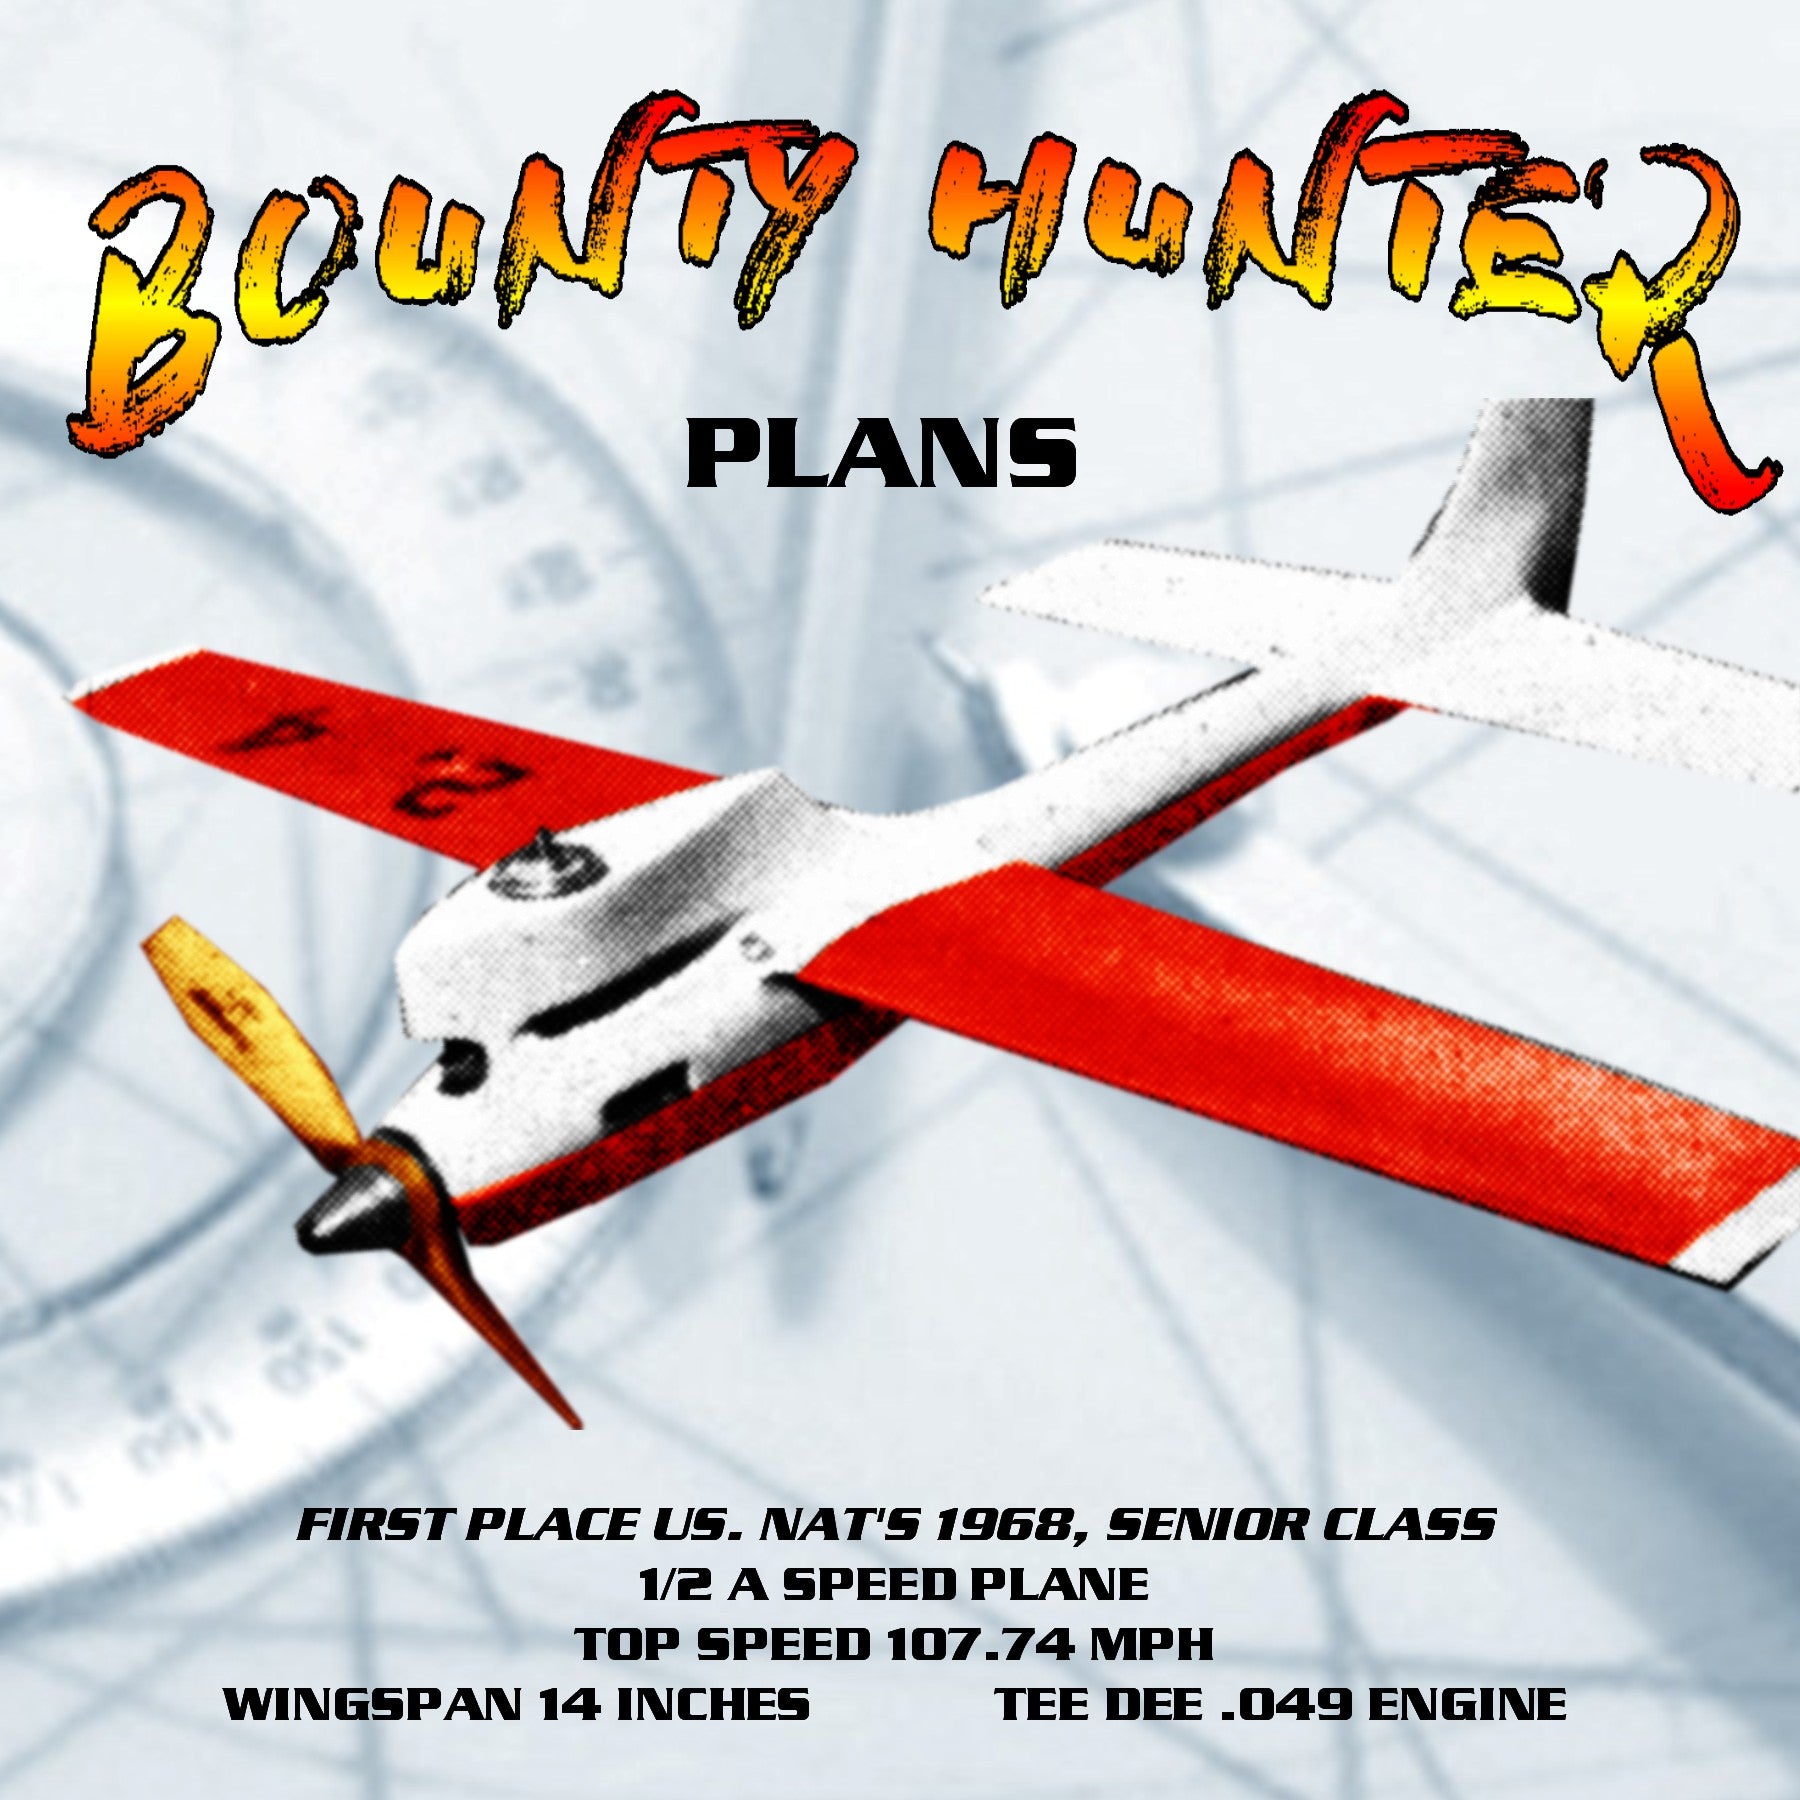 full size printed plan 1973 1/2 a control line speed  bounty hunter w/s 14 inches ,tee dee .049 engine